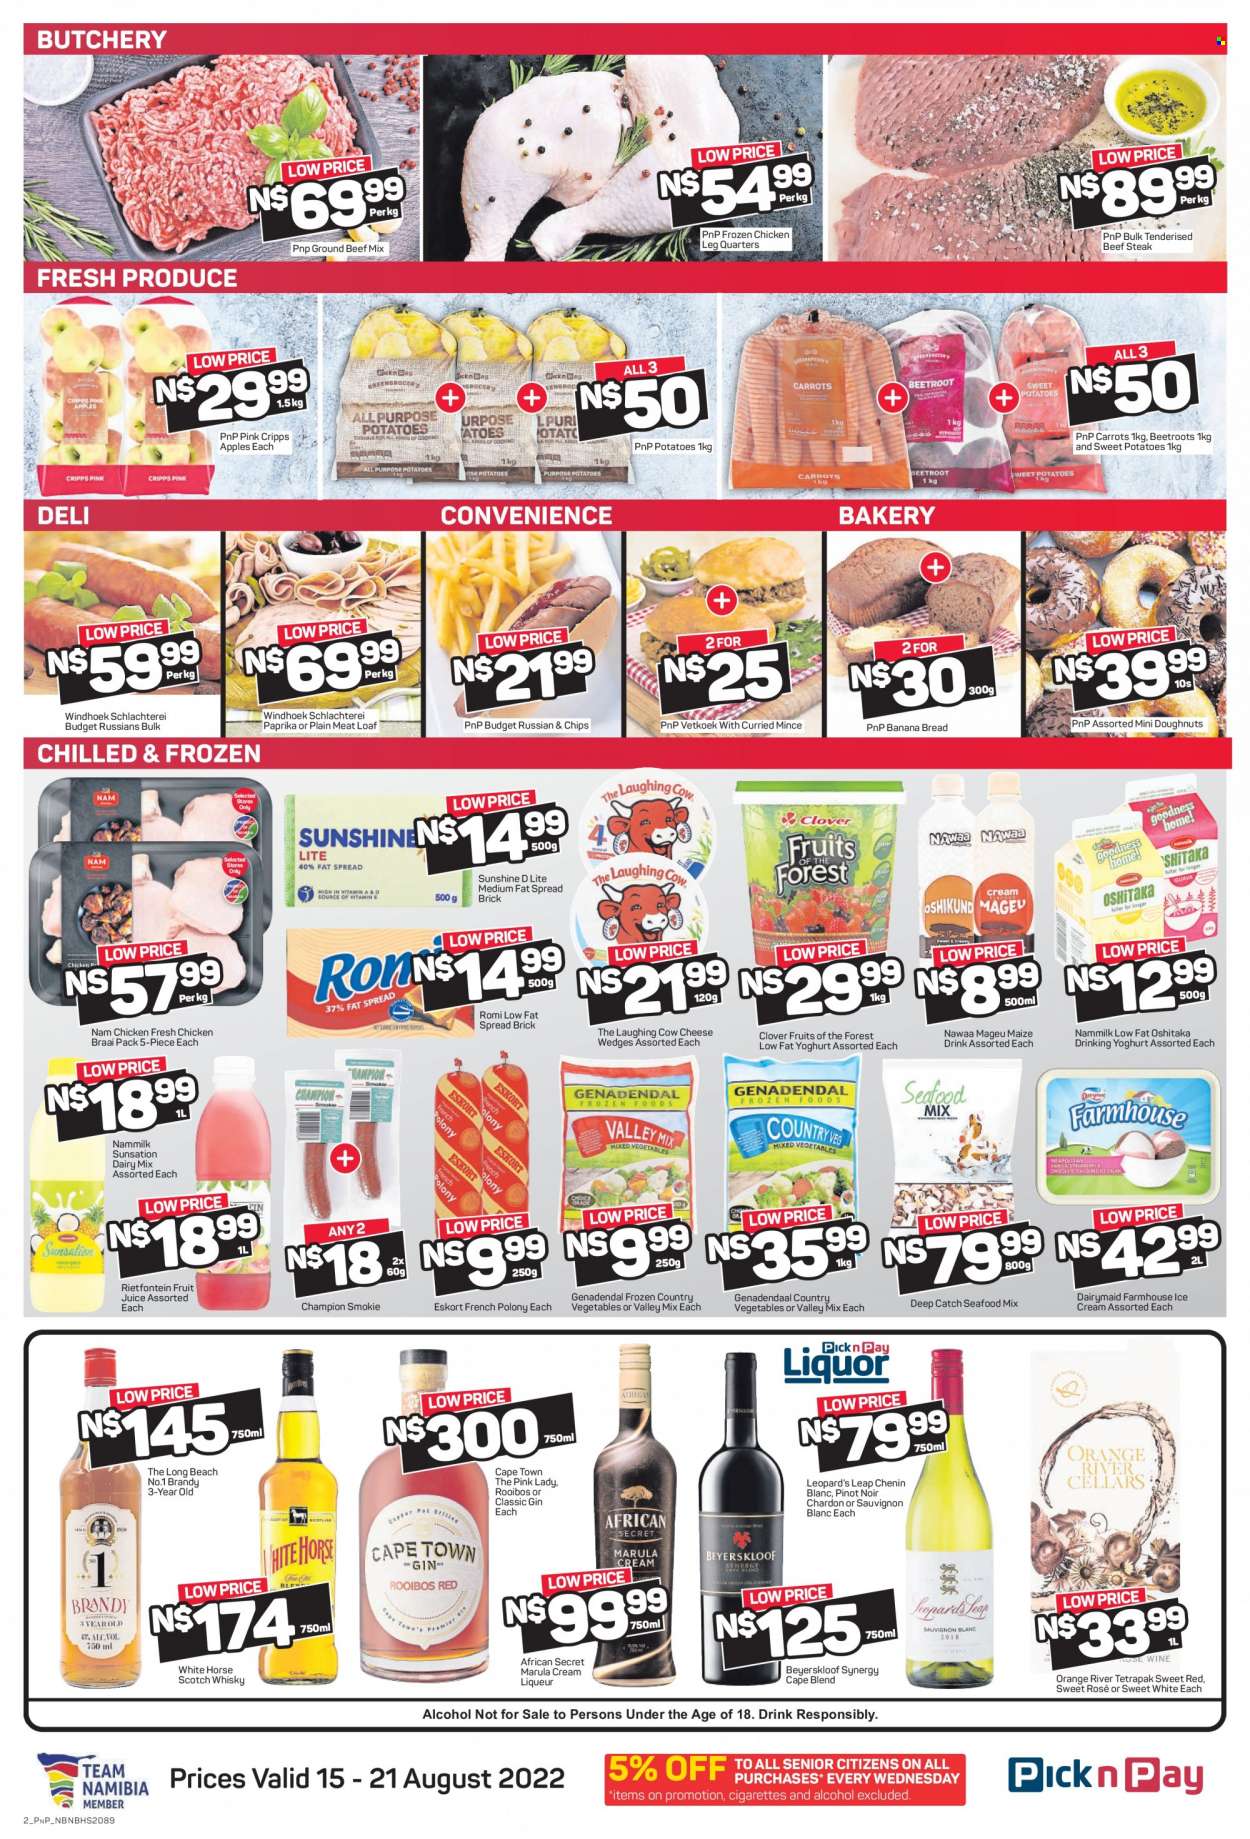 Pick n Pay catalogue  - 15/08/2022 - 21/08/2022 - Sales products - bread, donut, banana bread, carrots, sweet potato, potatoes, orange, apples, Pink Lady apples, seafood, french polony, polony, russians, cheese, The Laughing Cow, yoghurt, Clover, yoghurt drink, Number 1 Mageu, fat spread, Sunshine, ice cream, fruit juice, juice, rooibos tea, red wine, white wine, wine, Pinot Noir, alcohol, Chenin Blanc, Sauvignon Blanc, rosé wine, brandy, gin, liqueur, scotch whisky, whisky, chicken legs, chicken meat, beef meat, beef steak, ground beef, steak. Page 3.